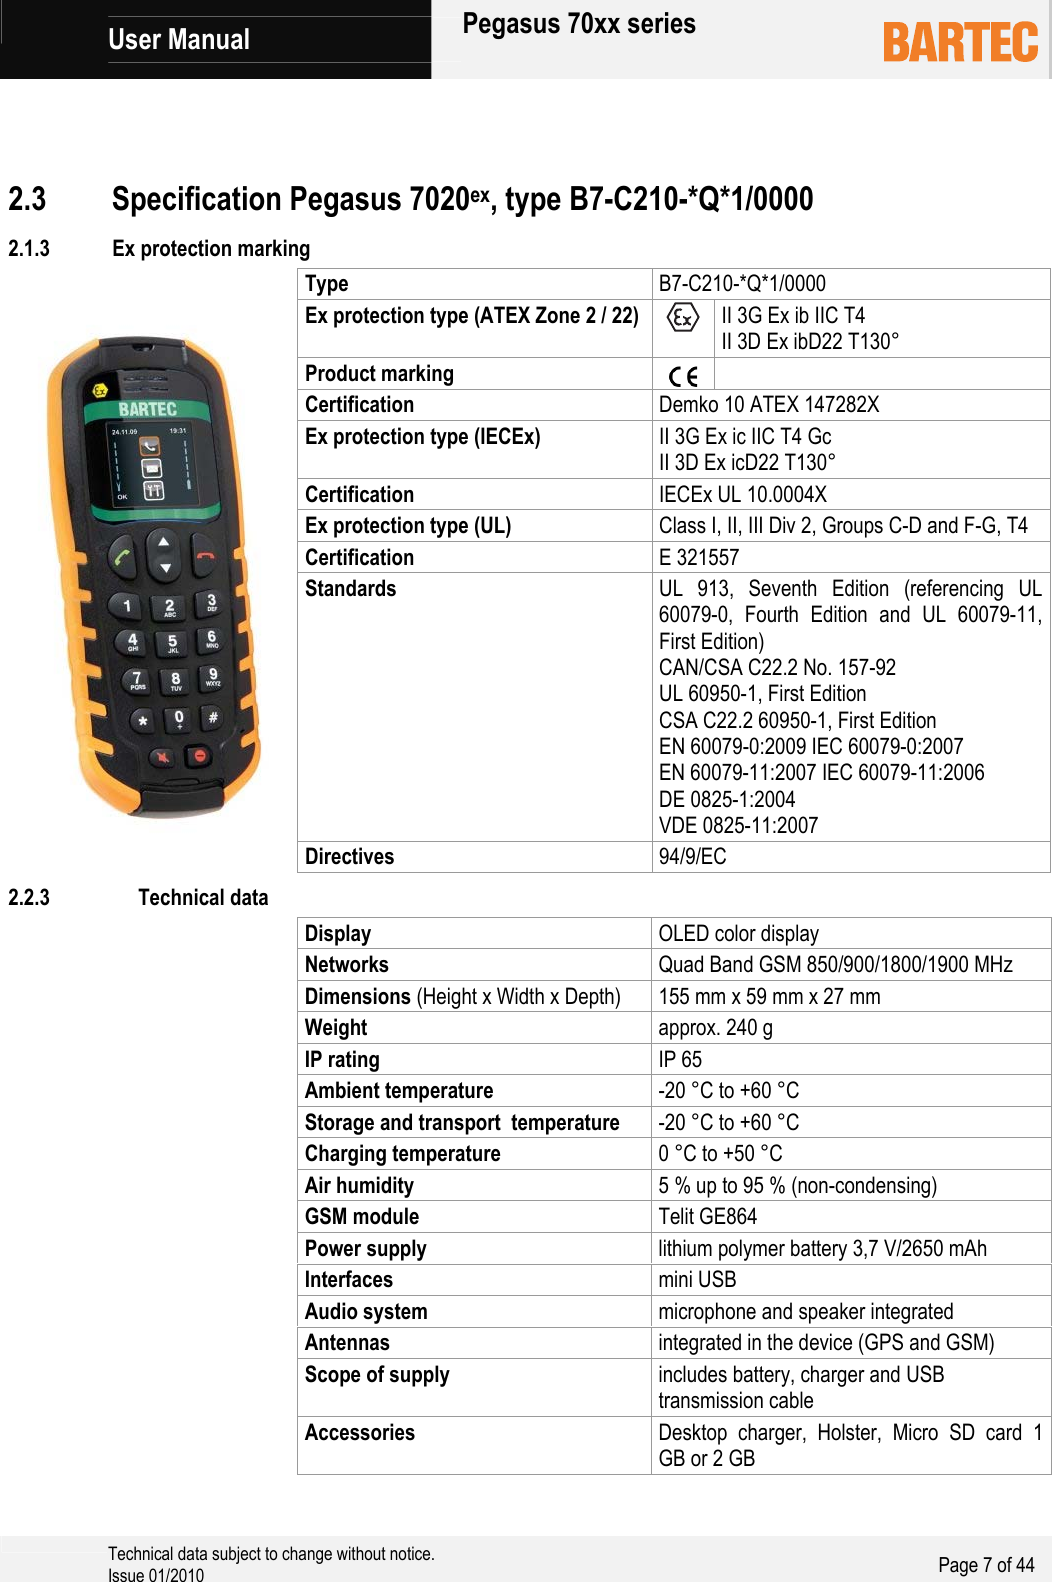             User Manual   Pegasus 70xx series     Technical data subject to change without notice. Issue 01/2010  Page 7 of 44    2.1.3 Ex protection marking Type  B7-C210-*Q*1/0000 Ex protection type (ATEX Zone 2 / 22)   II 3G Ex ib IIC T4 II 3D Ex ibD22 T130° Product marking    Certification  Demko 10 ATEX 147282X Ex protection type (IECEx) II 3G Ex ic IIC T4 Gc II 3D Ex icD22 T130° Certification  IECEx UL 10.0004X Ex protection type (UL) Class I, II, III Div 2, Groups C-D and F-G, T4 Certification  E 321557 Standards  UL 913, Seventh Edition (referencing UL 60079-0, Fourth Edition and UL 60079-11, First Edition) CAN/CSA C22.2 No. 157-92 UL 60950-1, First Edition CSA C22.2 60950-1, First Edition EN 60079-0:2009 IEC 60079-0:2007 EN 60079-11:2007 IEC 60079-11:2006 DE 0825-1:2004 VDE 0825-11:2007 Directives  94/9/EC 2.3 Specification Pegasus 7020ex, type B7-C210-*Q*1/0000 2.2.3 Technical data Display  OLED color display Networks  Quad Band GSM 850/900/1800/1900 MHz Dimensions (Height x Width x Depth) 155 mm x 59 mm x 27 mm Weight  approx. 240 g IP rating IP 65 Ambient temperature  -20 °C to +60 °C Storage and transport  temperature  -20 °C to +60 °C Charging temperature  0 °C to +50 °C Air humidity  5 % up to 95 % (non-condensing) GSM module  Telit GE864 Power supply  lithium polymer battery 3,7 V/2650 mAh Interfaces  mini USB Audio system  microphone and speaker integrated Antennas  integrated in the device (GPS and GSM) Scope of supply  includes battery, charger and USB transmission cable Accessories  Desktop charger, Holster, Micro SD card 1 GB or 2 GB 